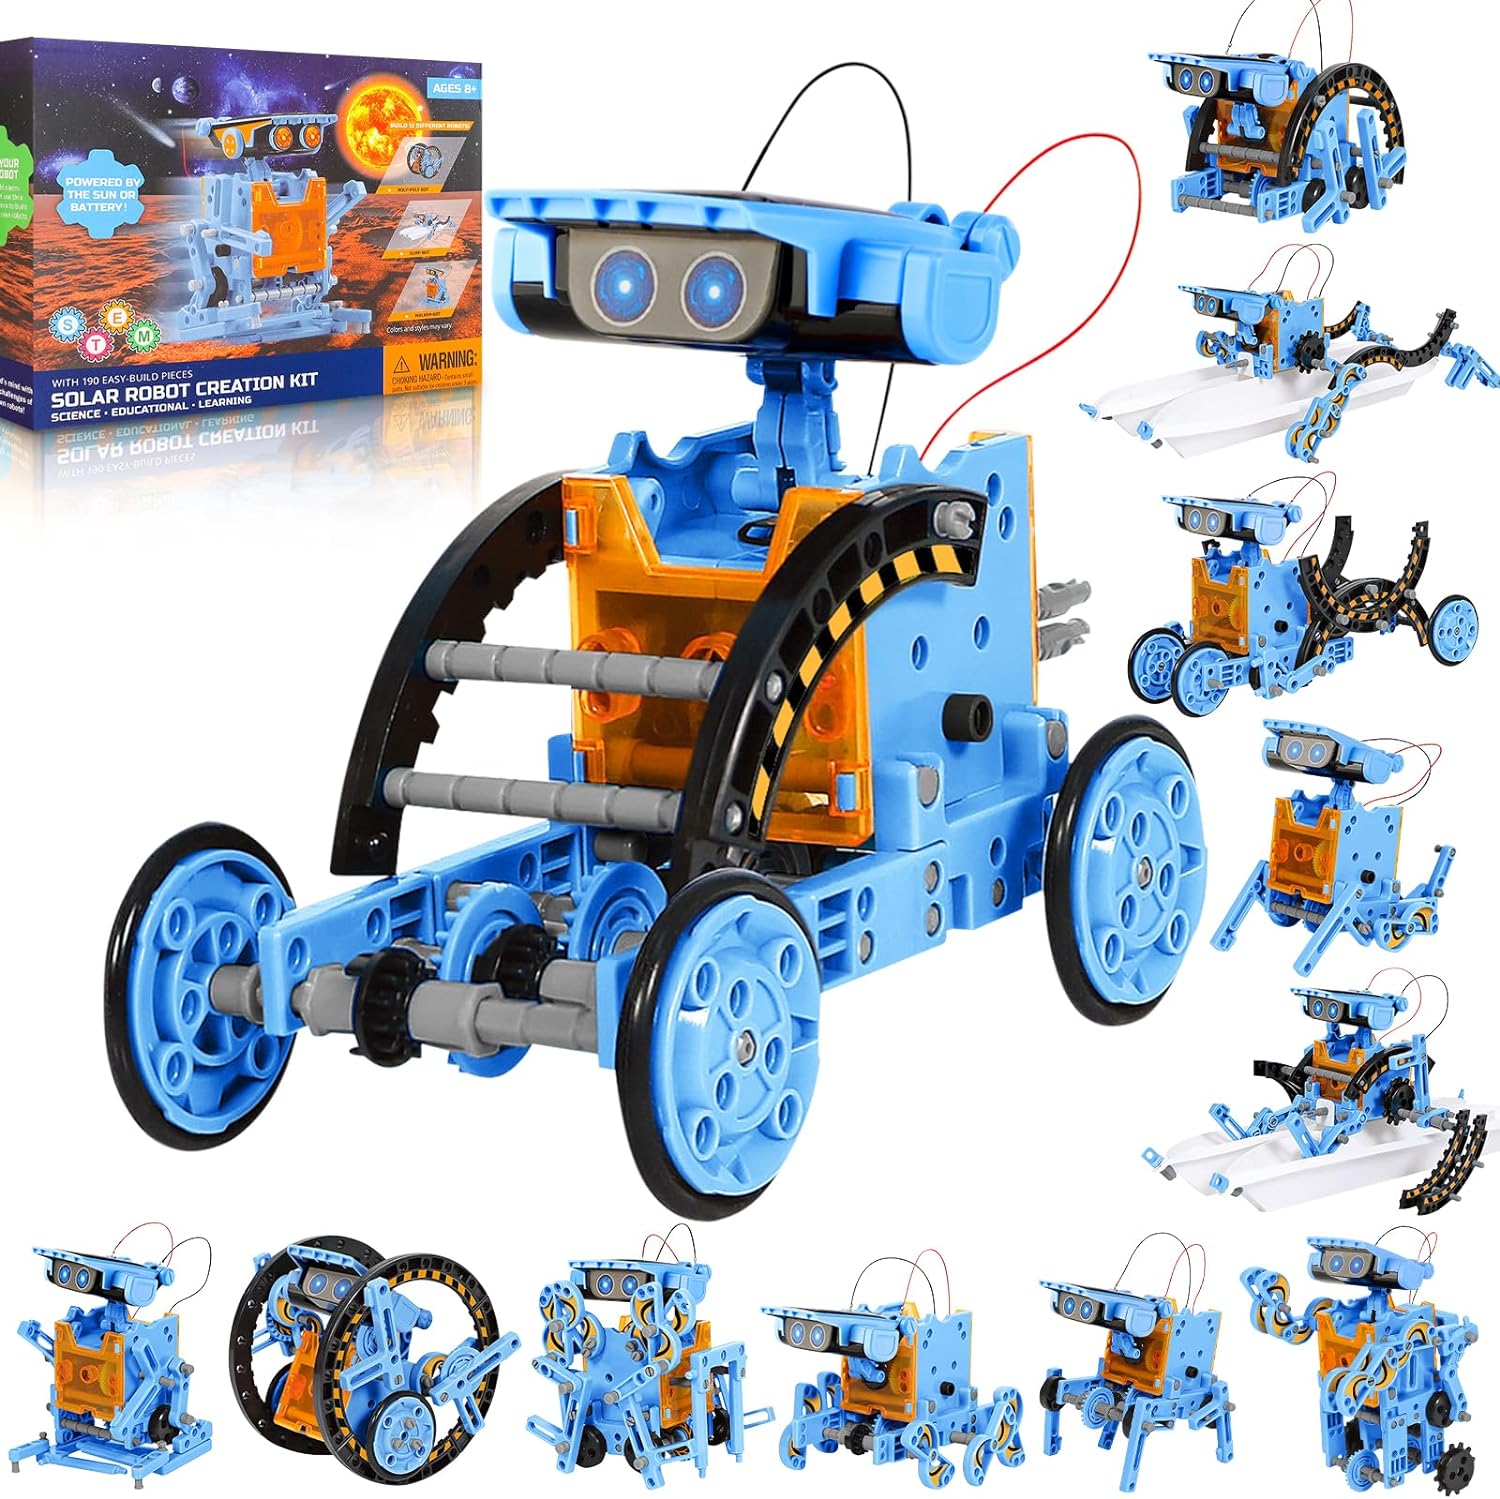 Sillbird 12-in-1 STEM Solar Robot Toys, Solar and Cell Powered Dual Drive Motor DIY Building Kit, Gifts for Boys and Girls Aged 8 9 10 11 12 Years Old